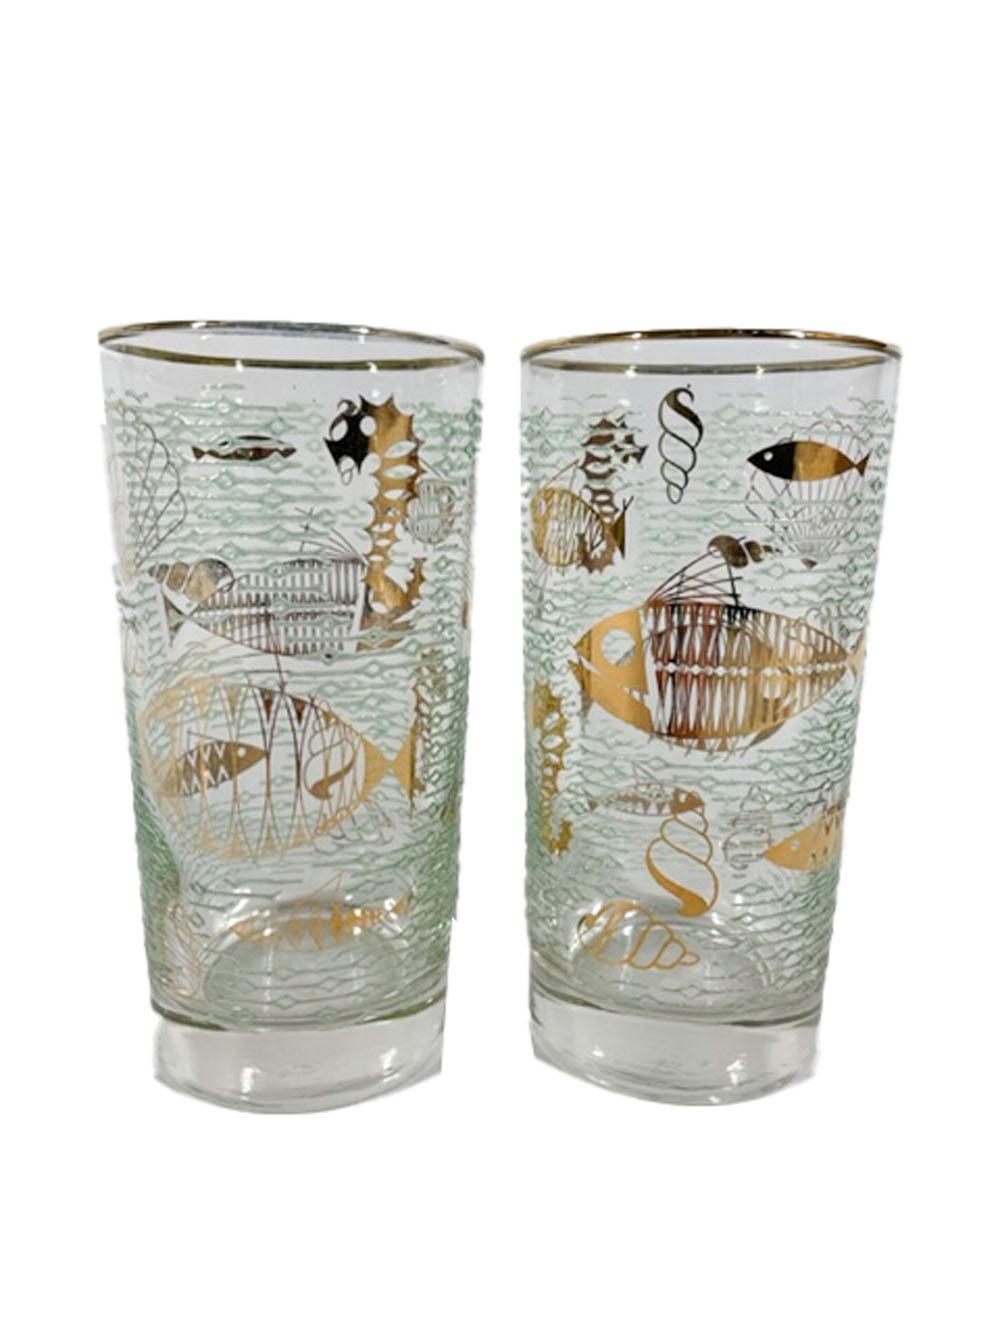 American Eight Libbey Atomic Period Marine Life Highball Glasses in Gold-Tone Caddy